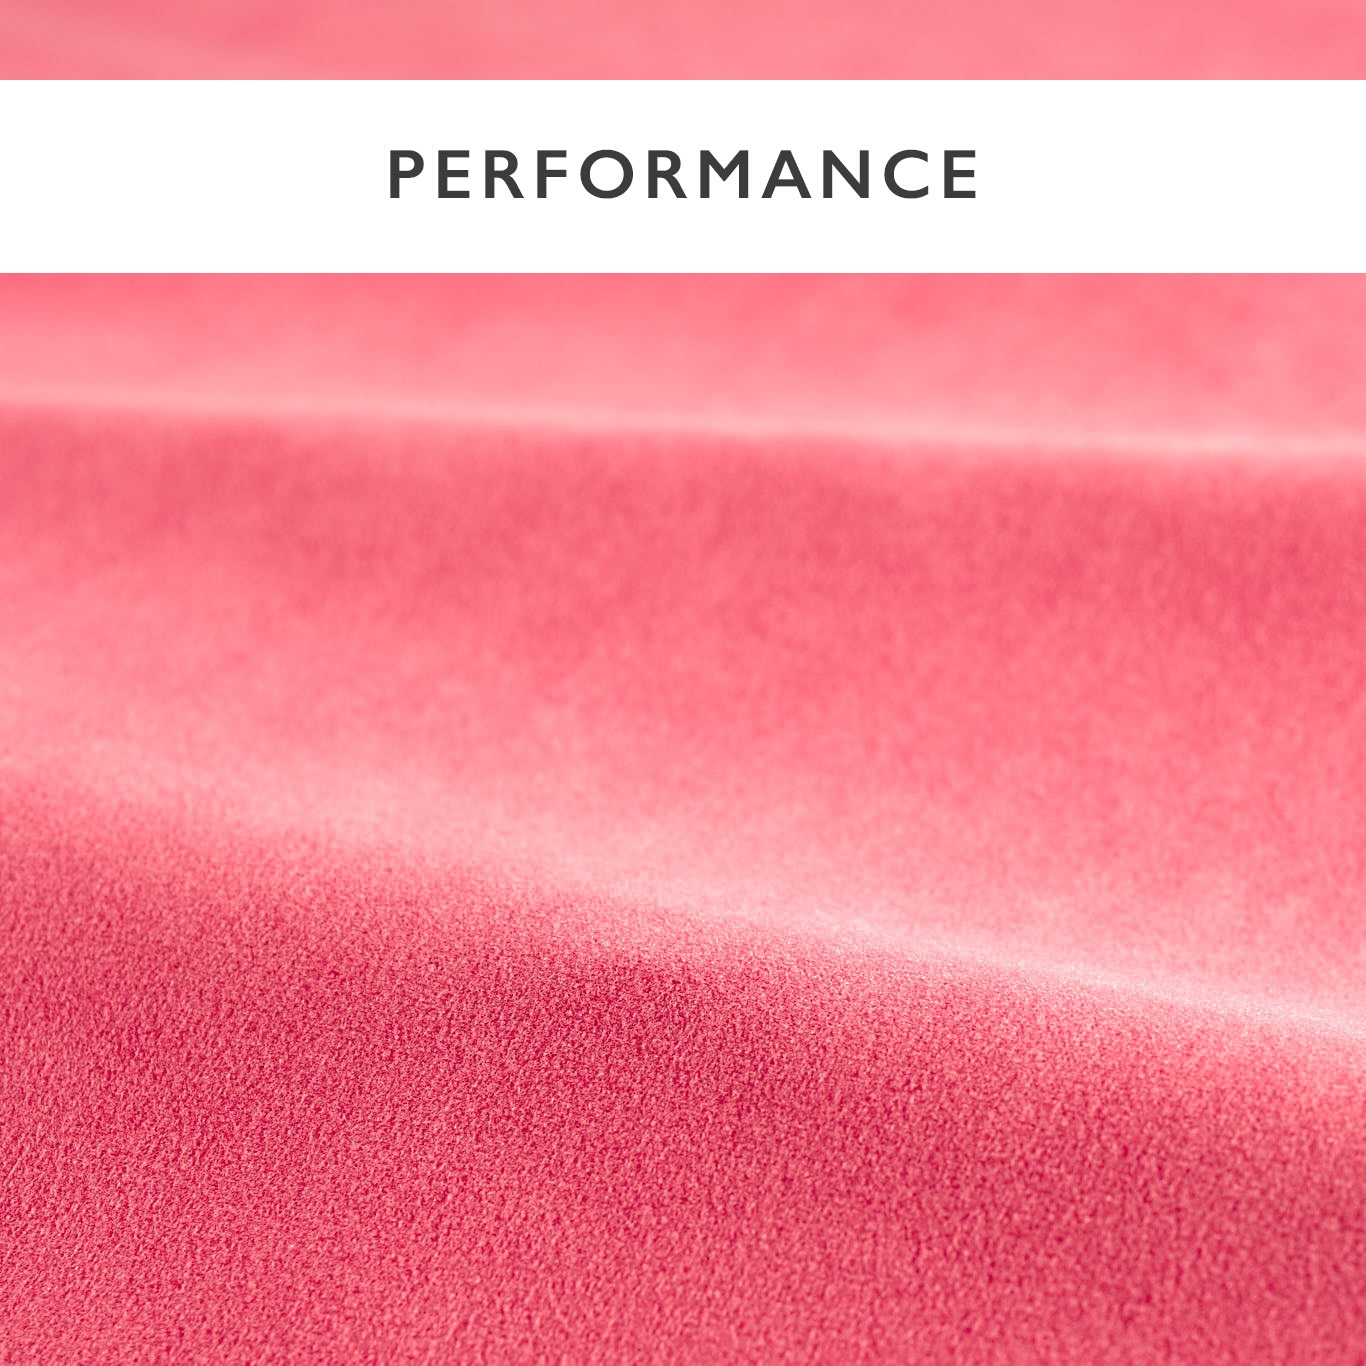 Performance Velvets Coral Fabric By Harlequin